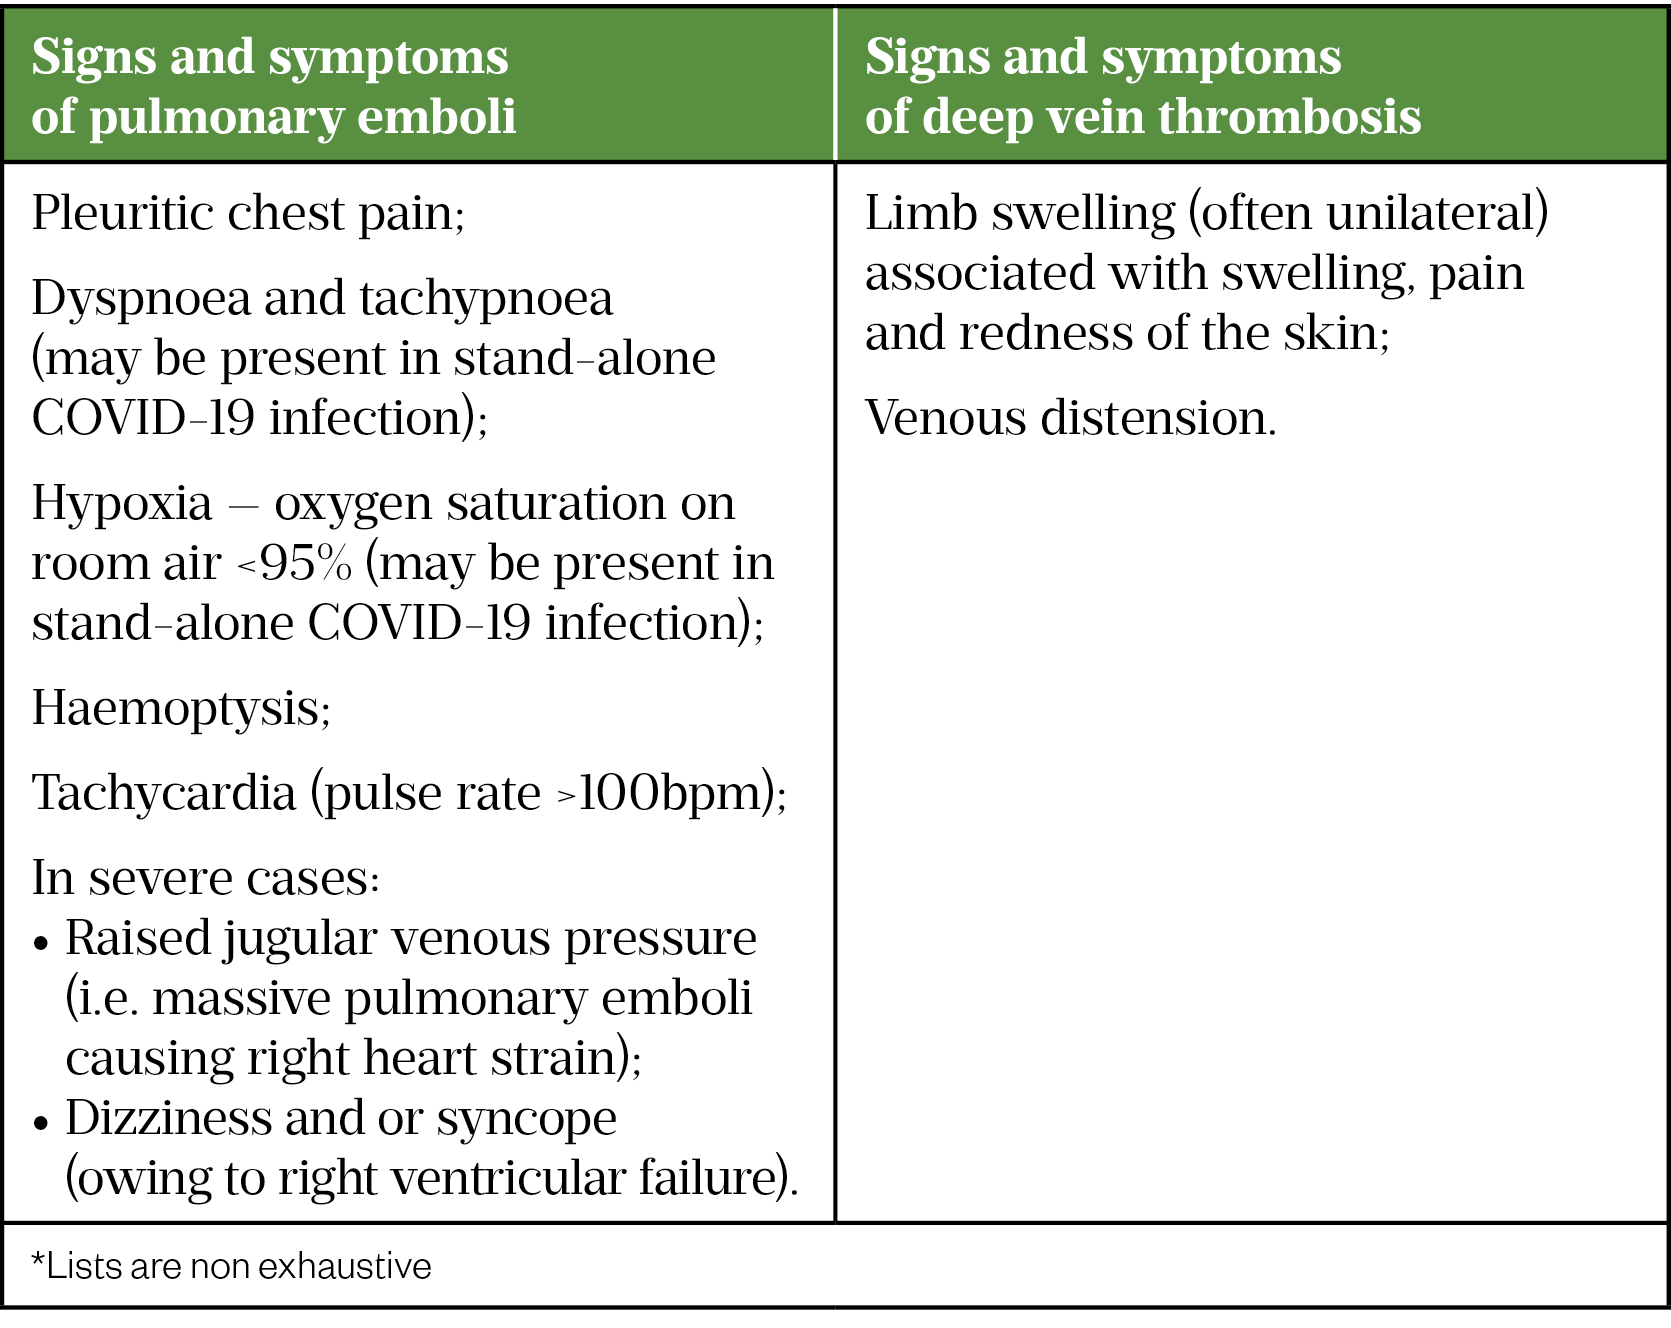 Table 1: Signs and symptoms of venous thromboembolism